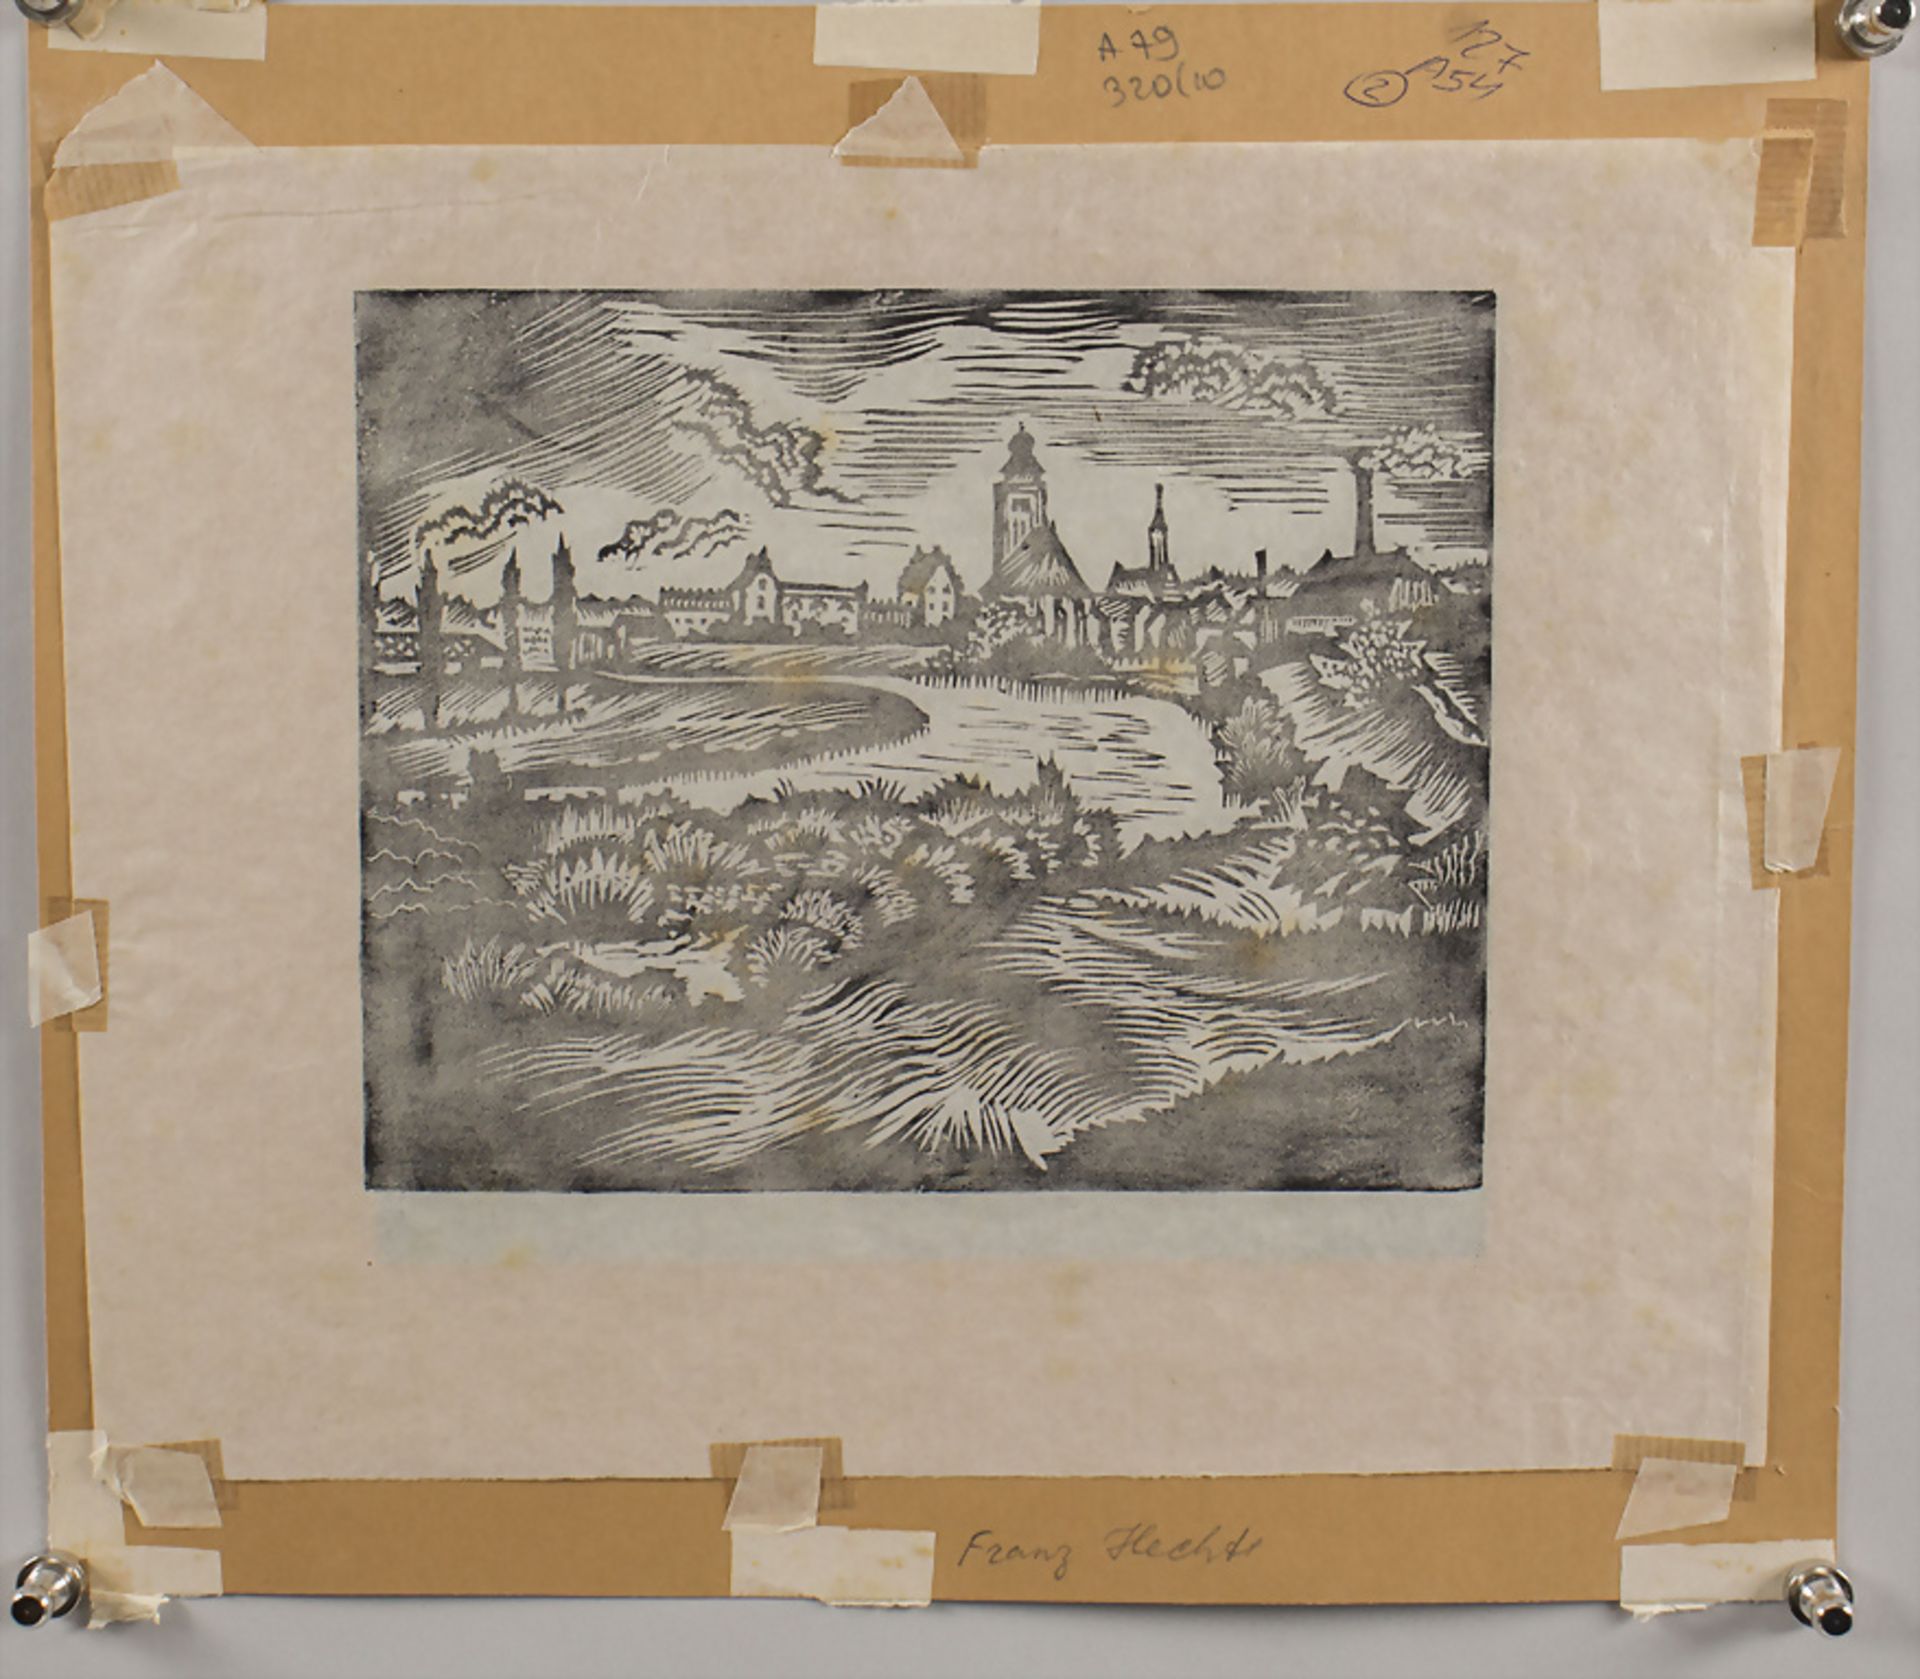 Franz HECHT (1877-1964), 'Stadtansicht mit Fluss' / 'City view with river' - Image 6 of 6